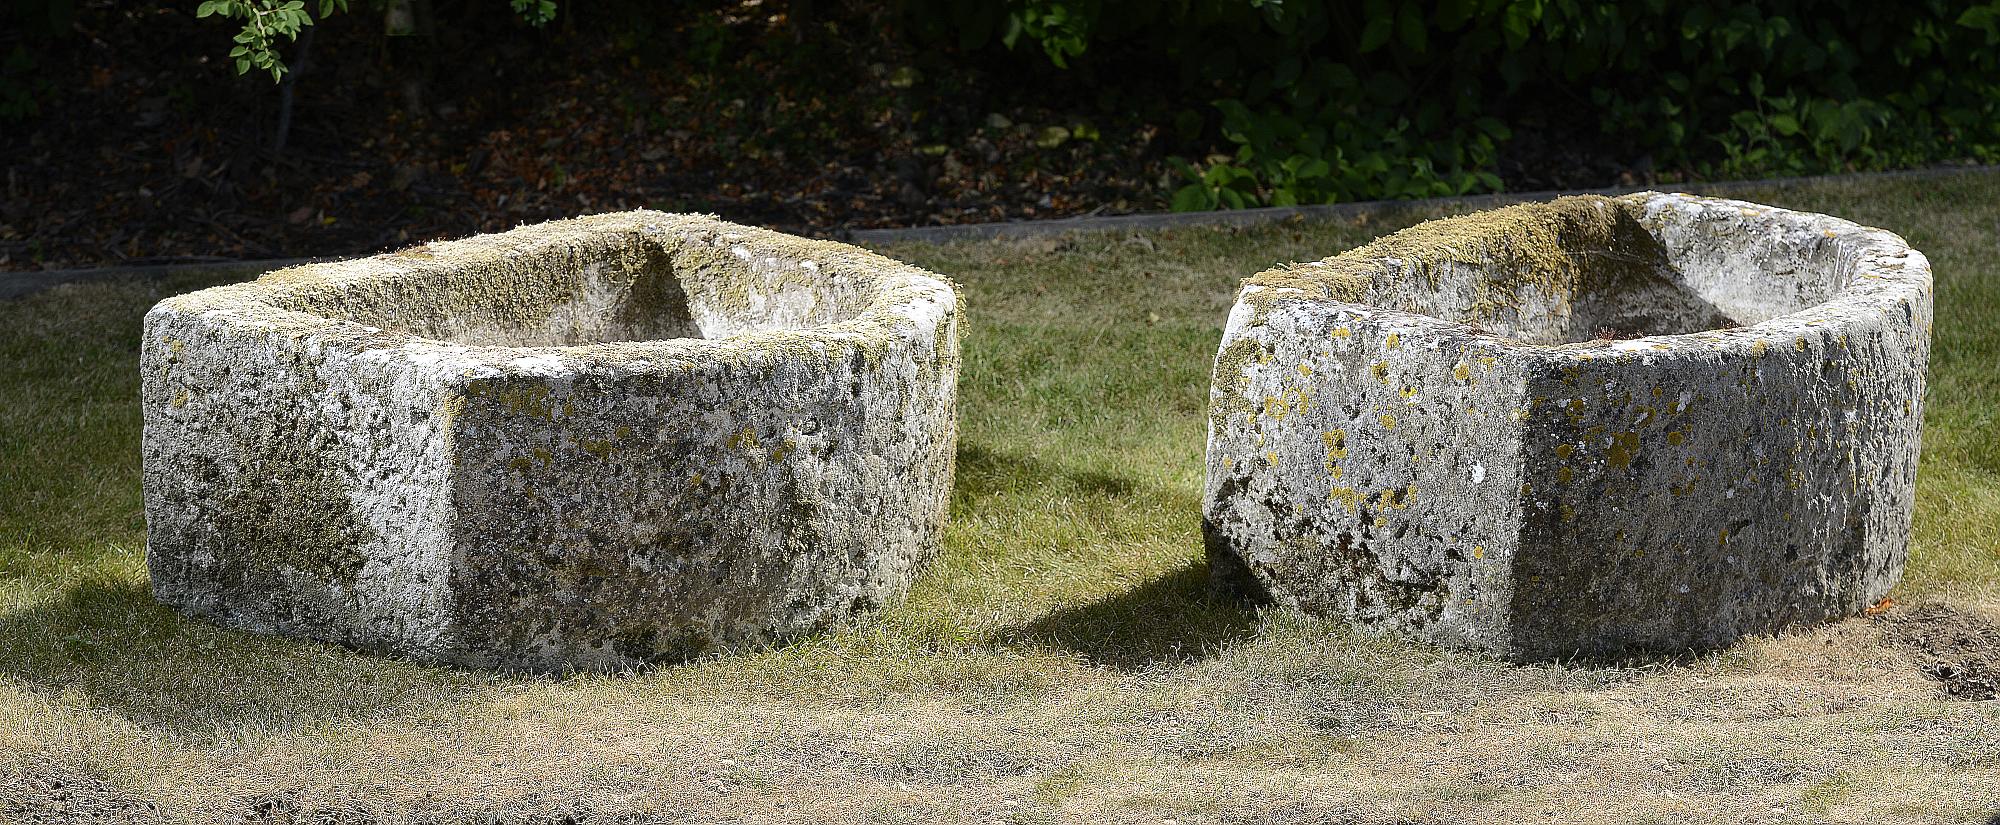 Planter/Water Feature: A pair of D-shaped carved limestone troughs34cm high by 83cm long by 61cm